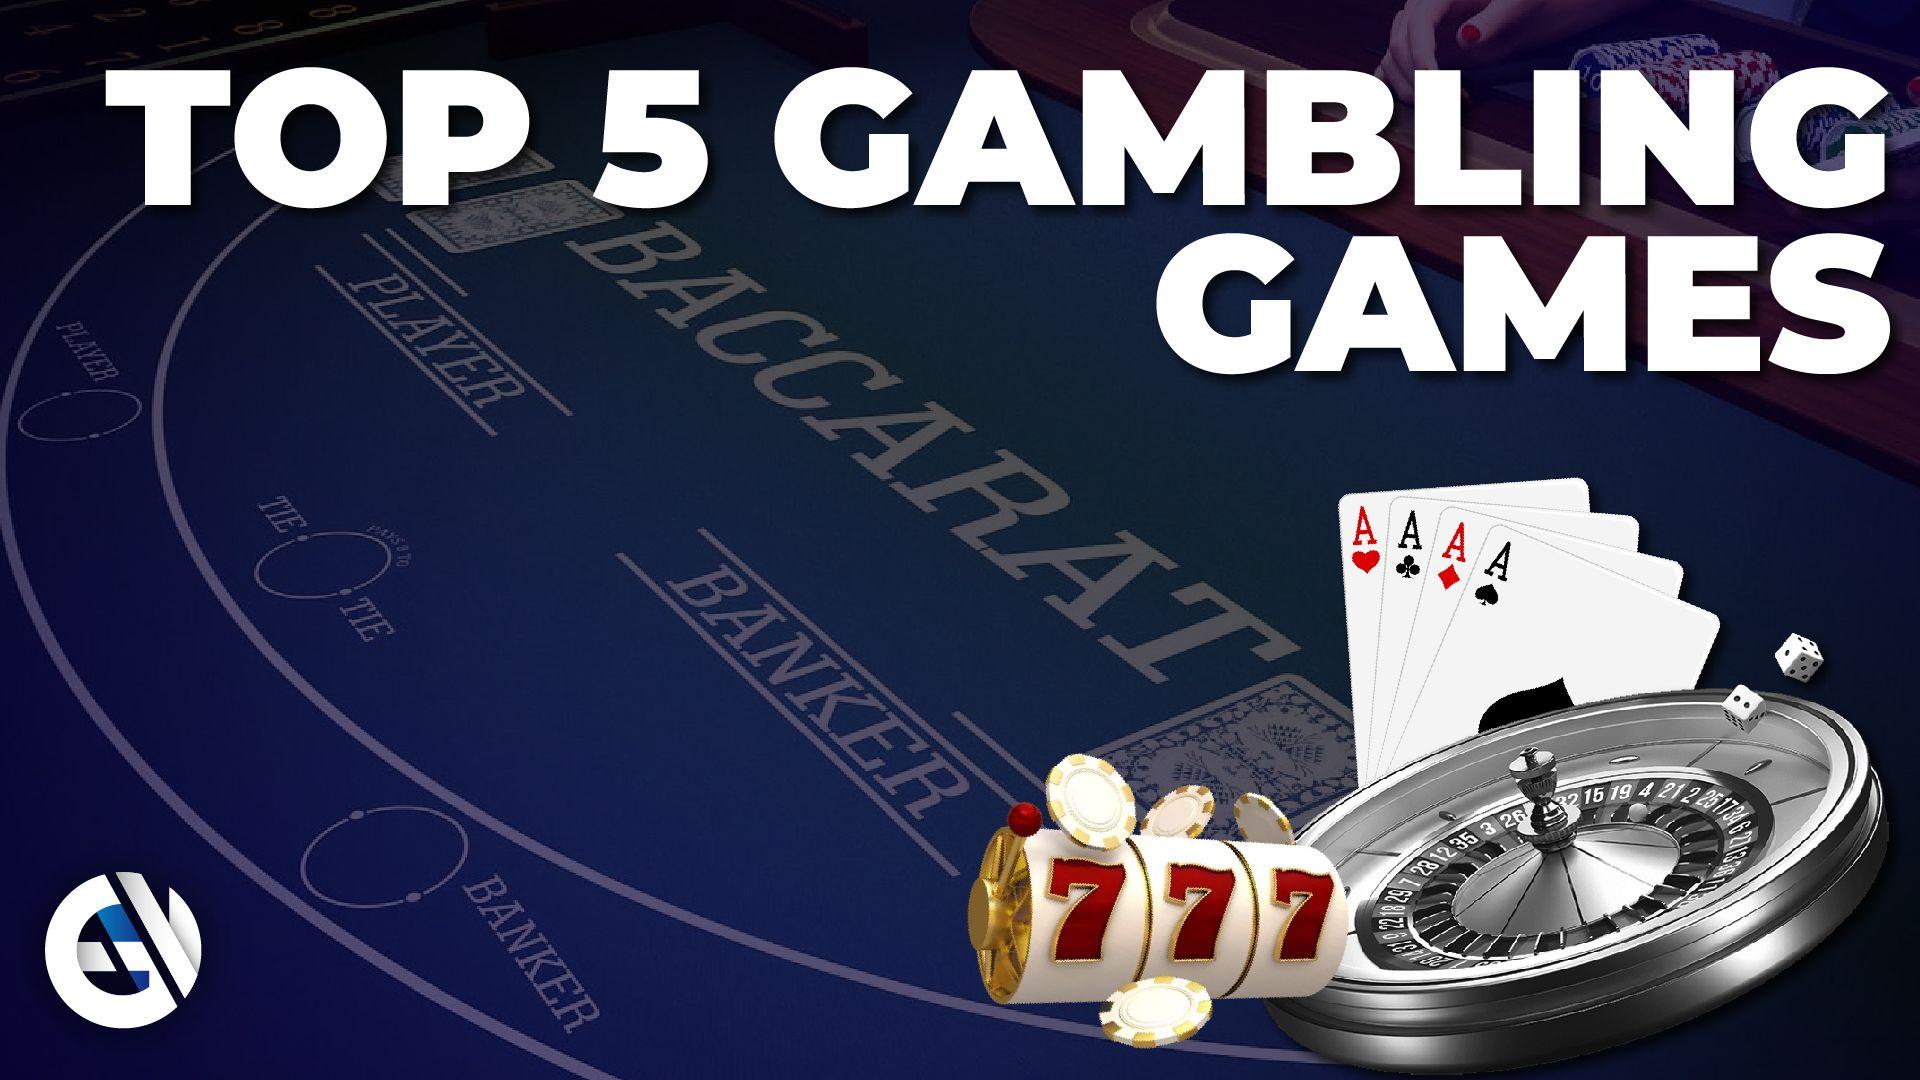 Top 5 most popular gambling games in the world